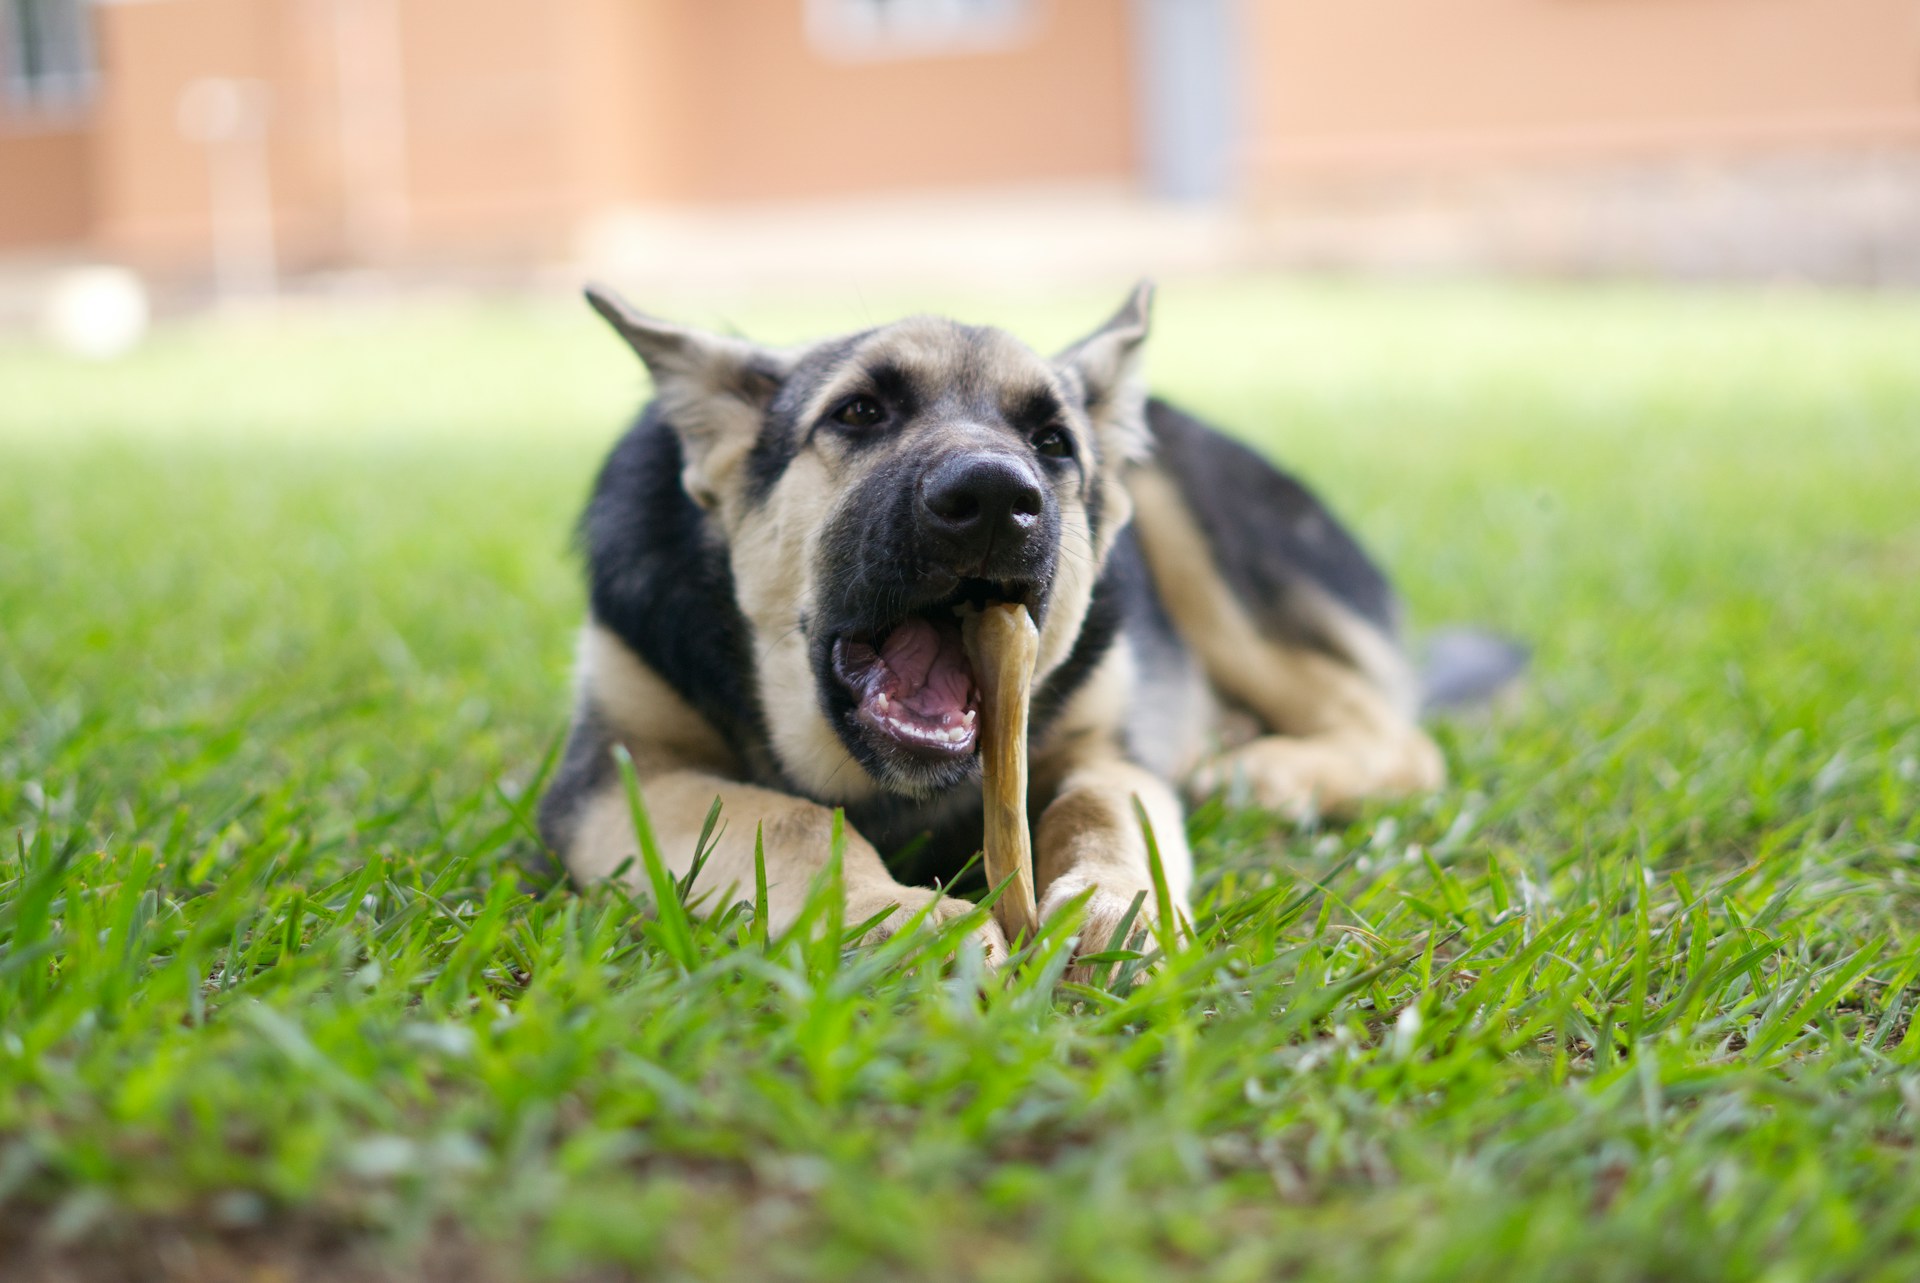 Dogs can fracture their teeth in many different ways. Treatment may include a crown, a tooth extraction, or root canal therapy, depending on the case. Here's what to do if your dog breaks a tooth.